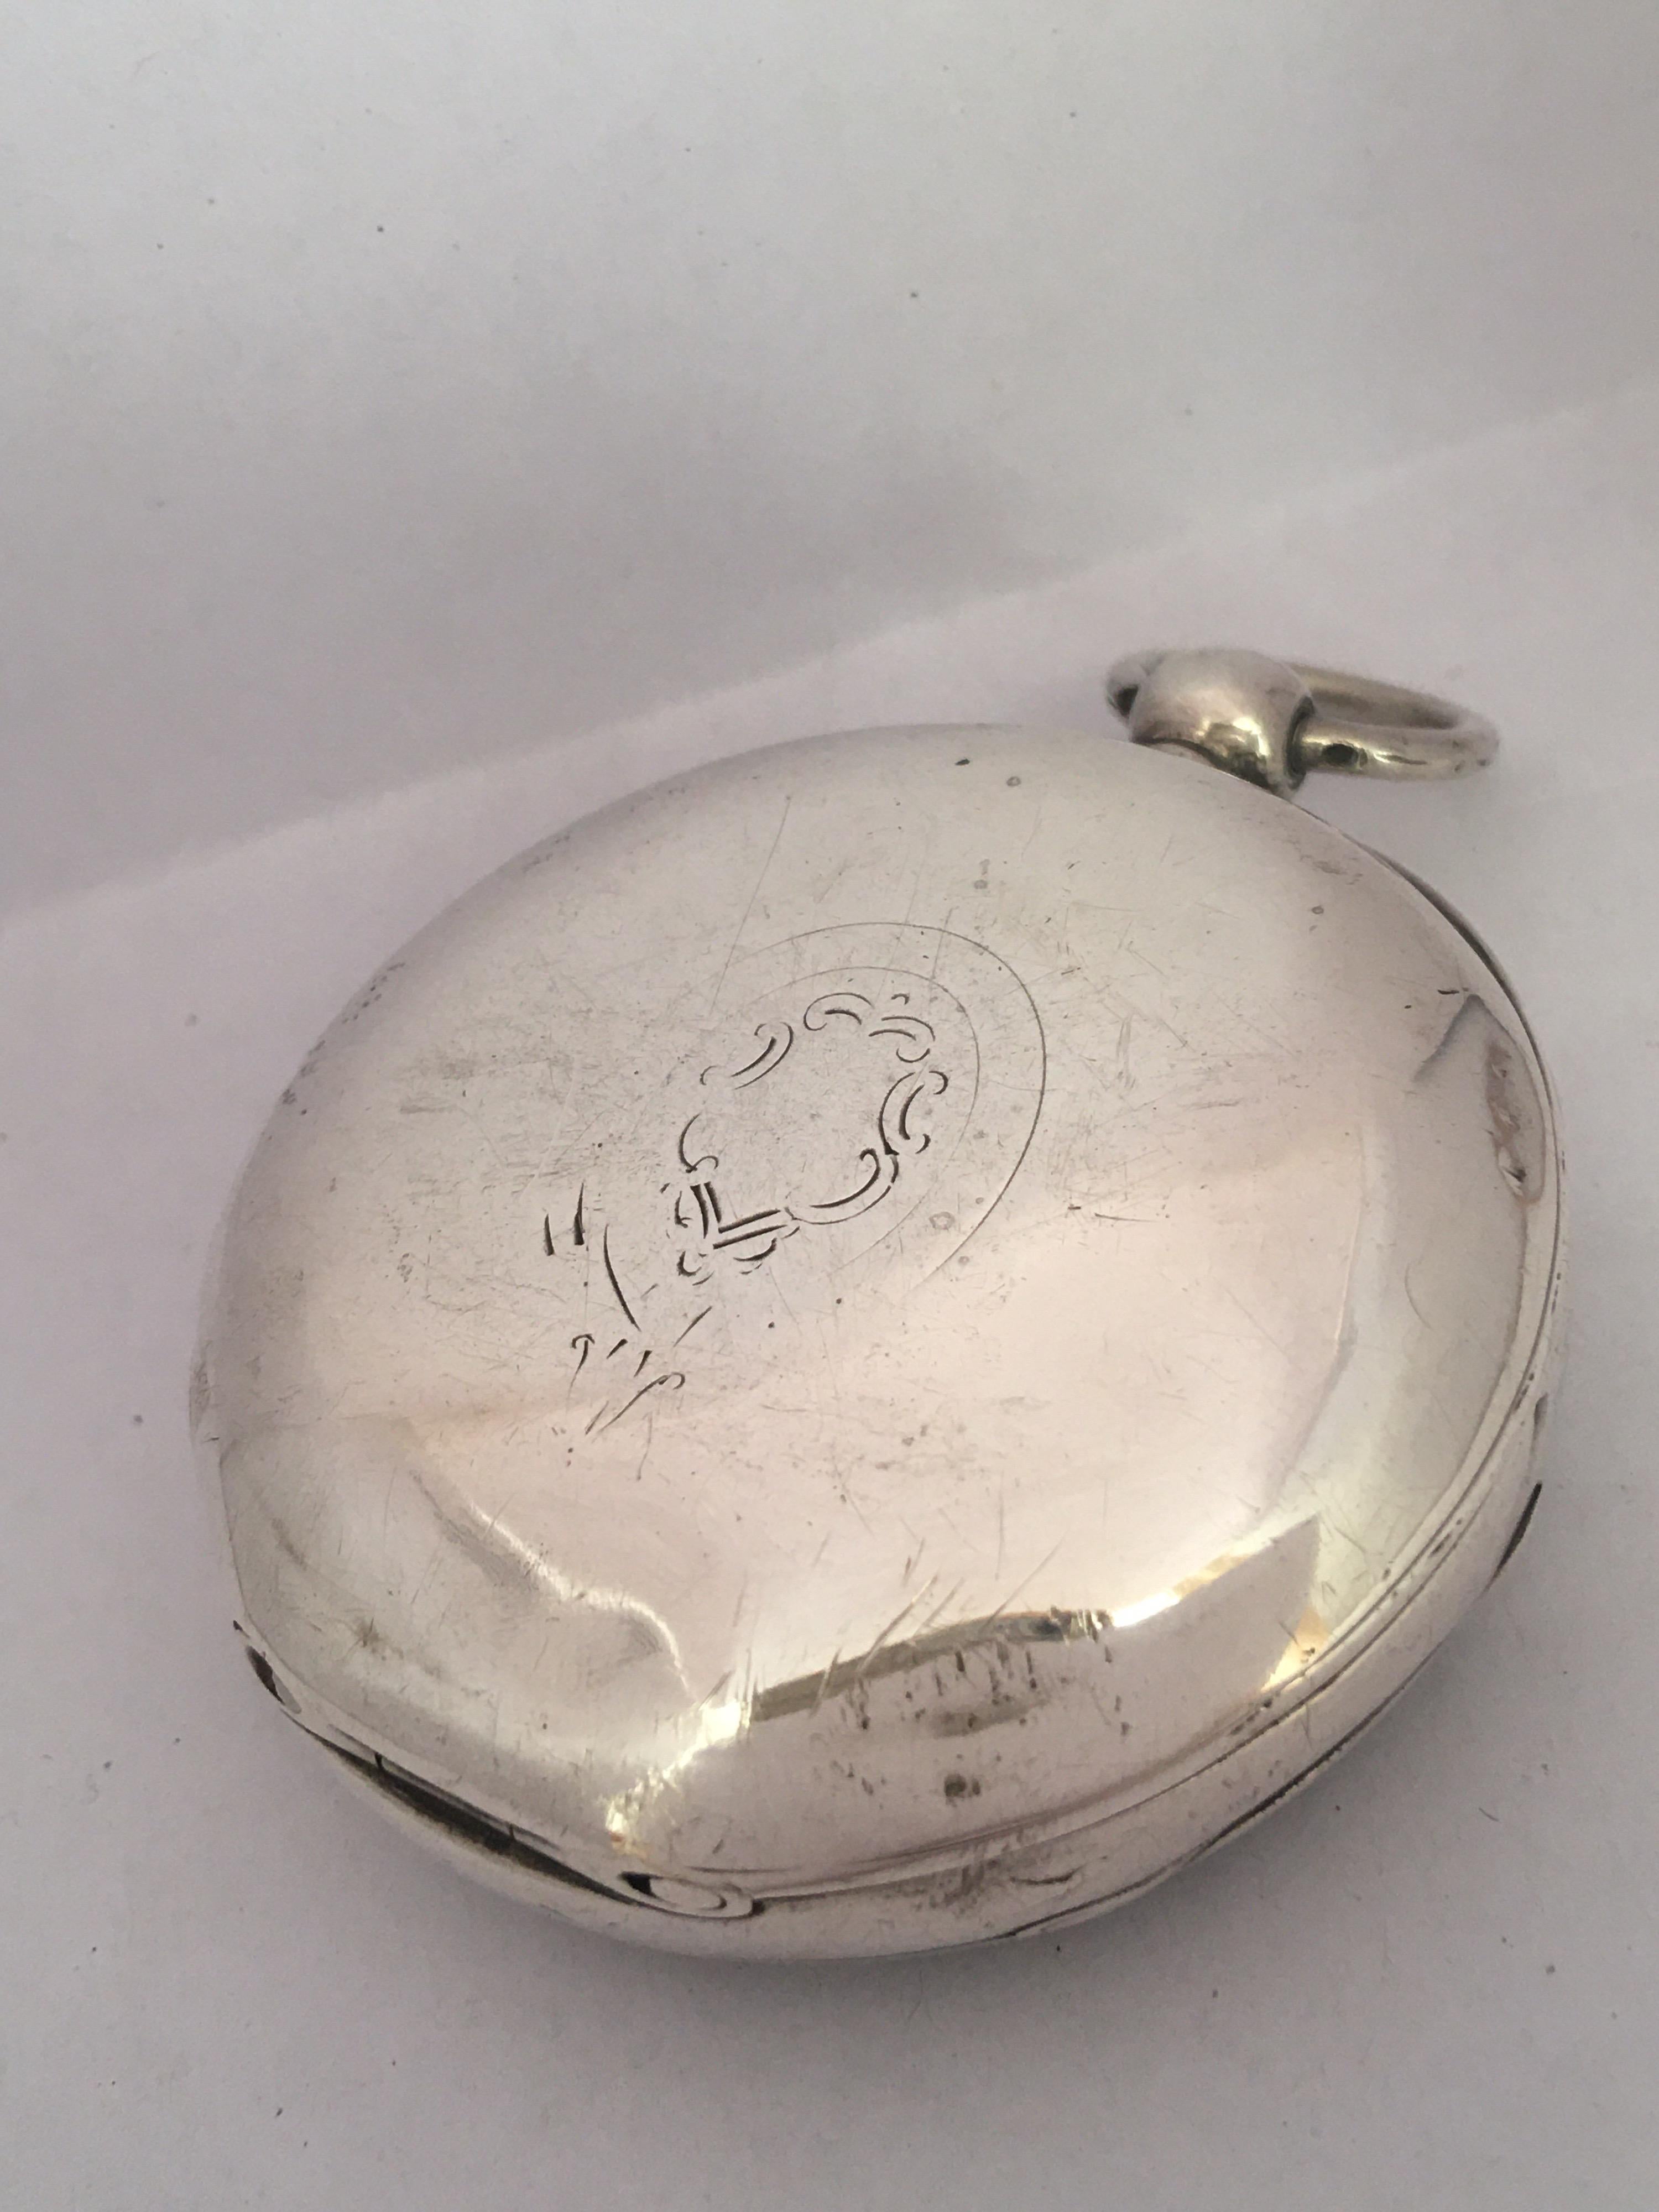 This beautiful antique 57mm diameter key-winding silver pocket watch is in good working order and it is running well (it keeps a good time). Visible signs of ageing and wear with small light surface marks on the glass and on the watch case as shown.